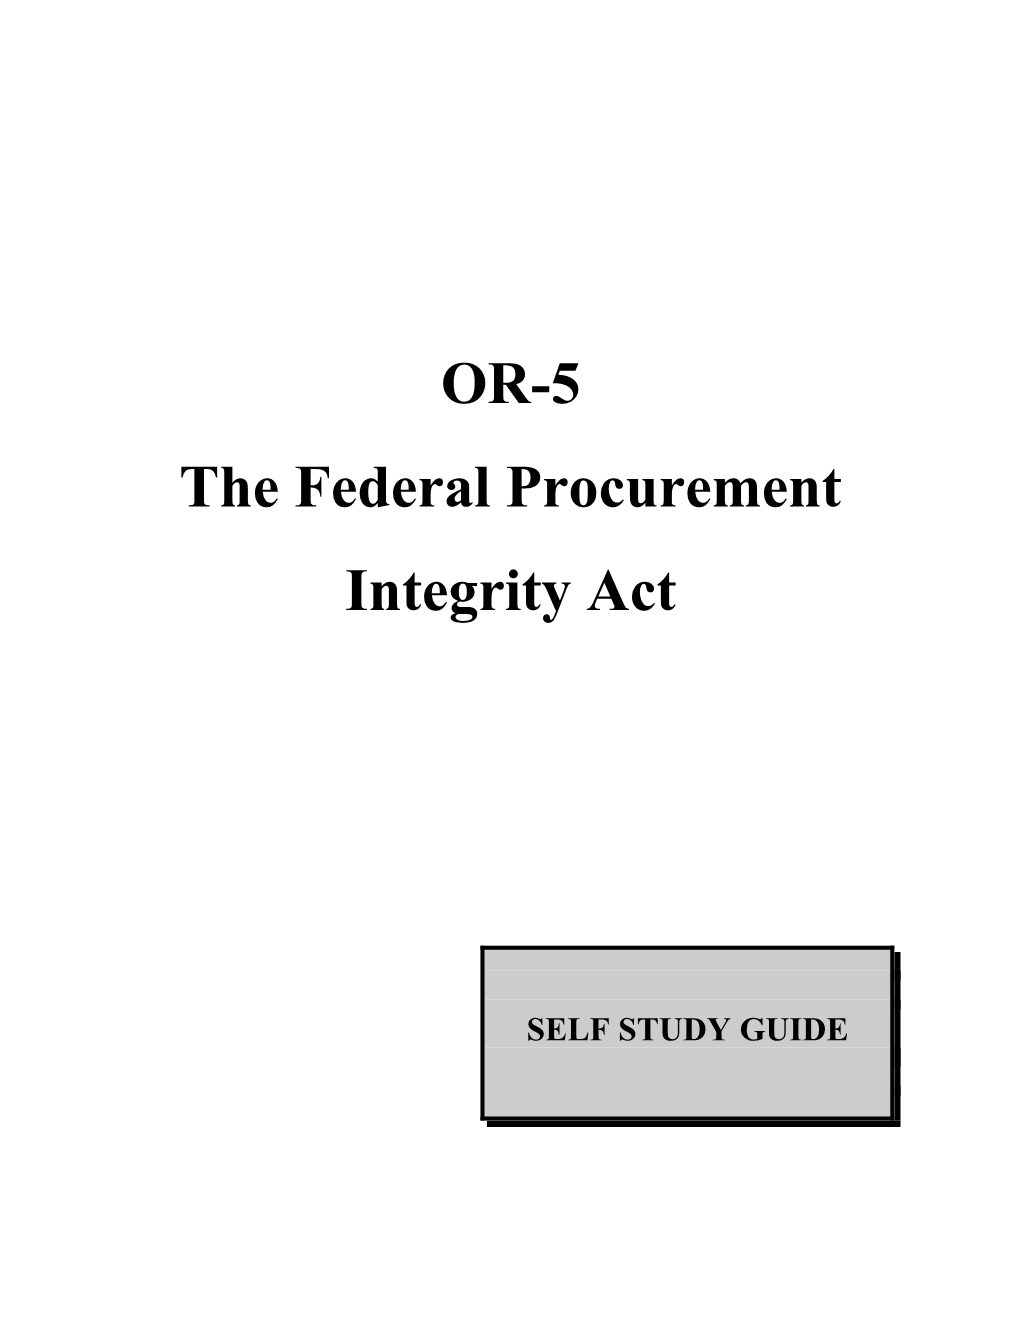 The Federal Procurement Integrity Act